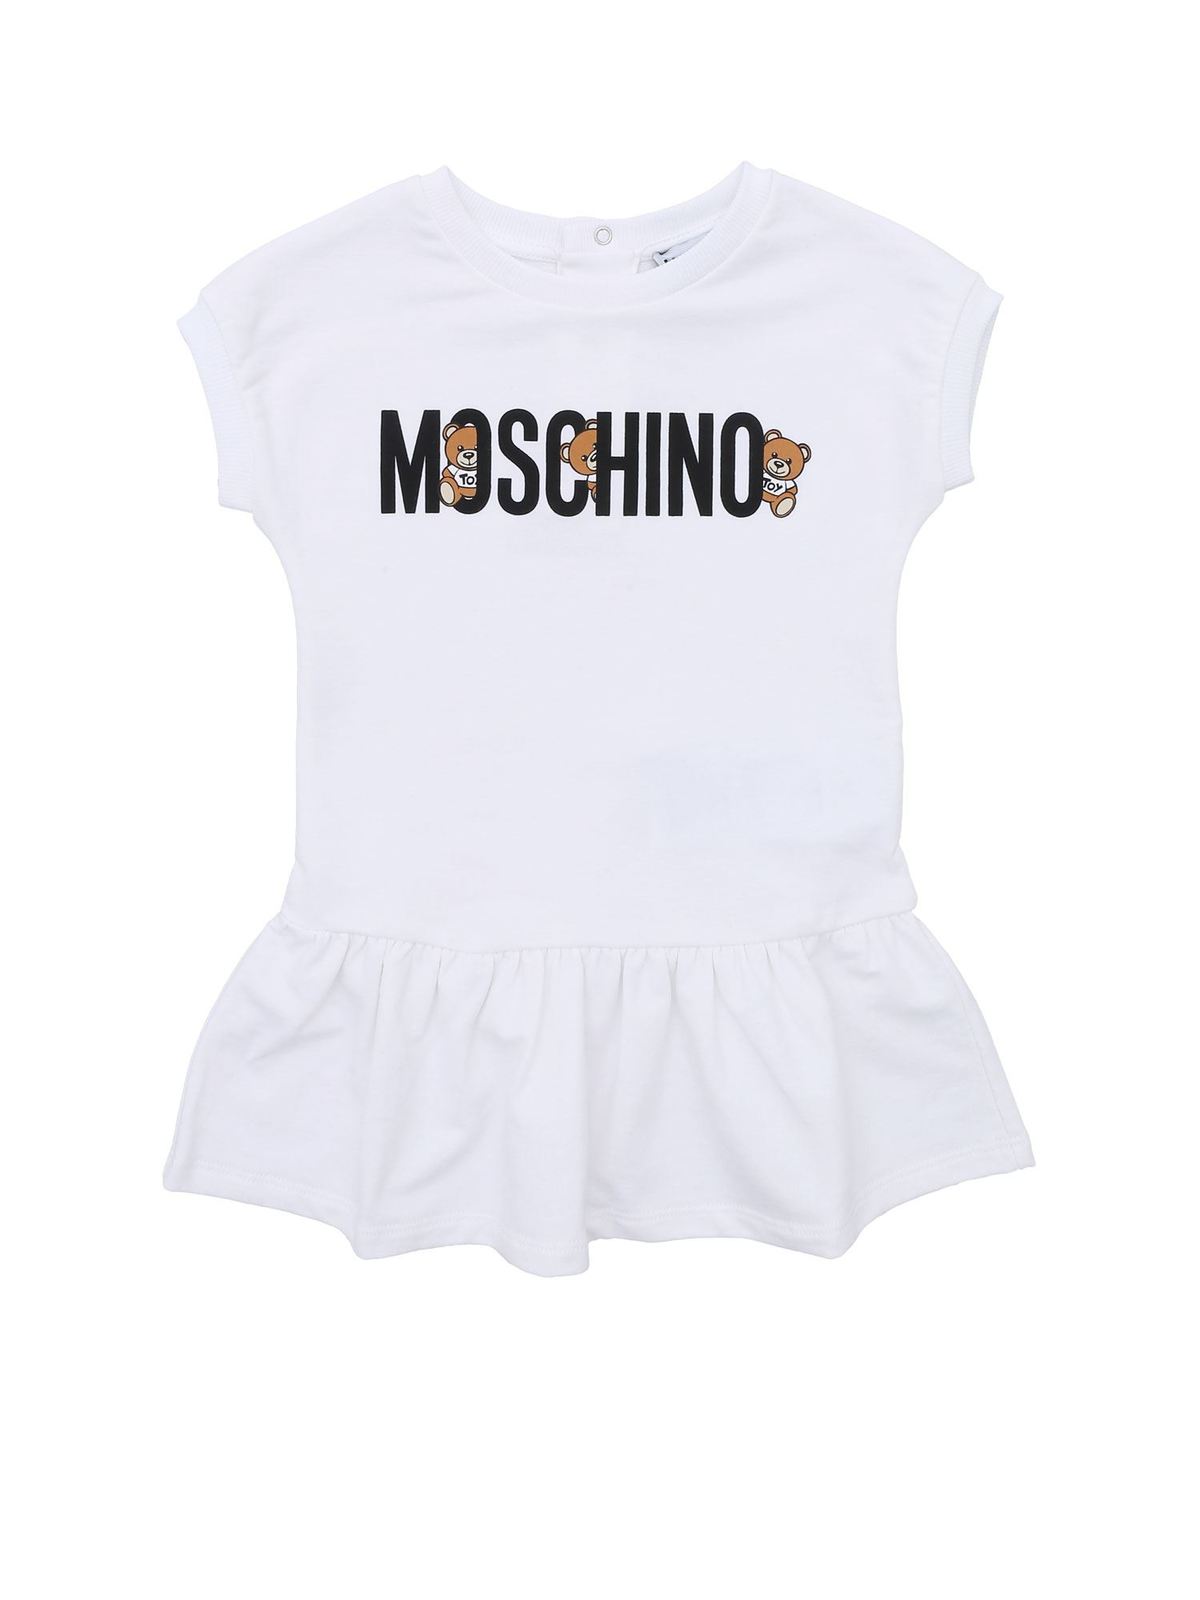 moschino dress for toddler